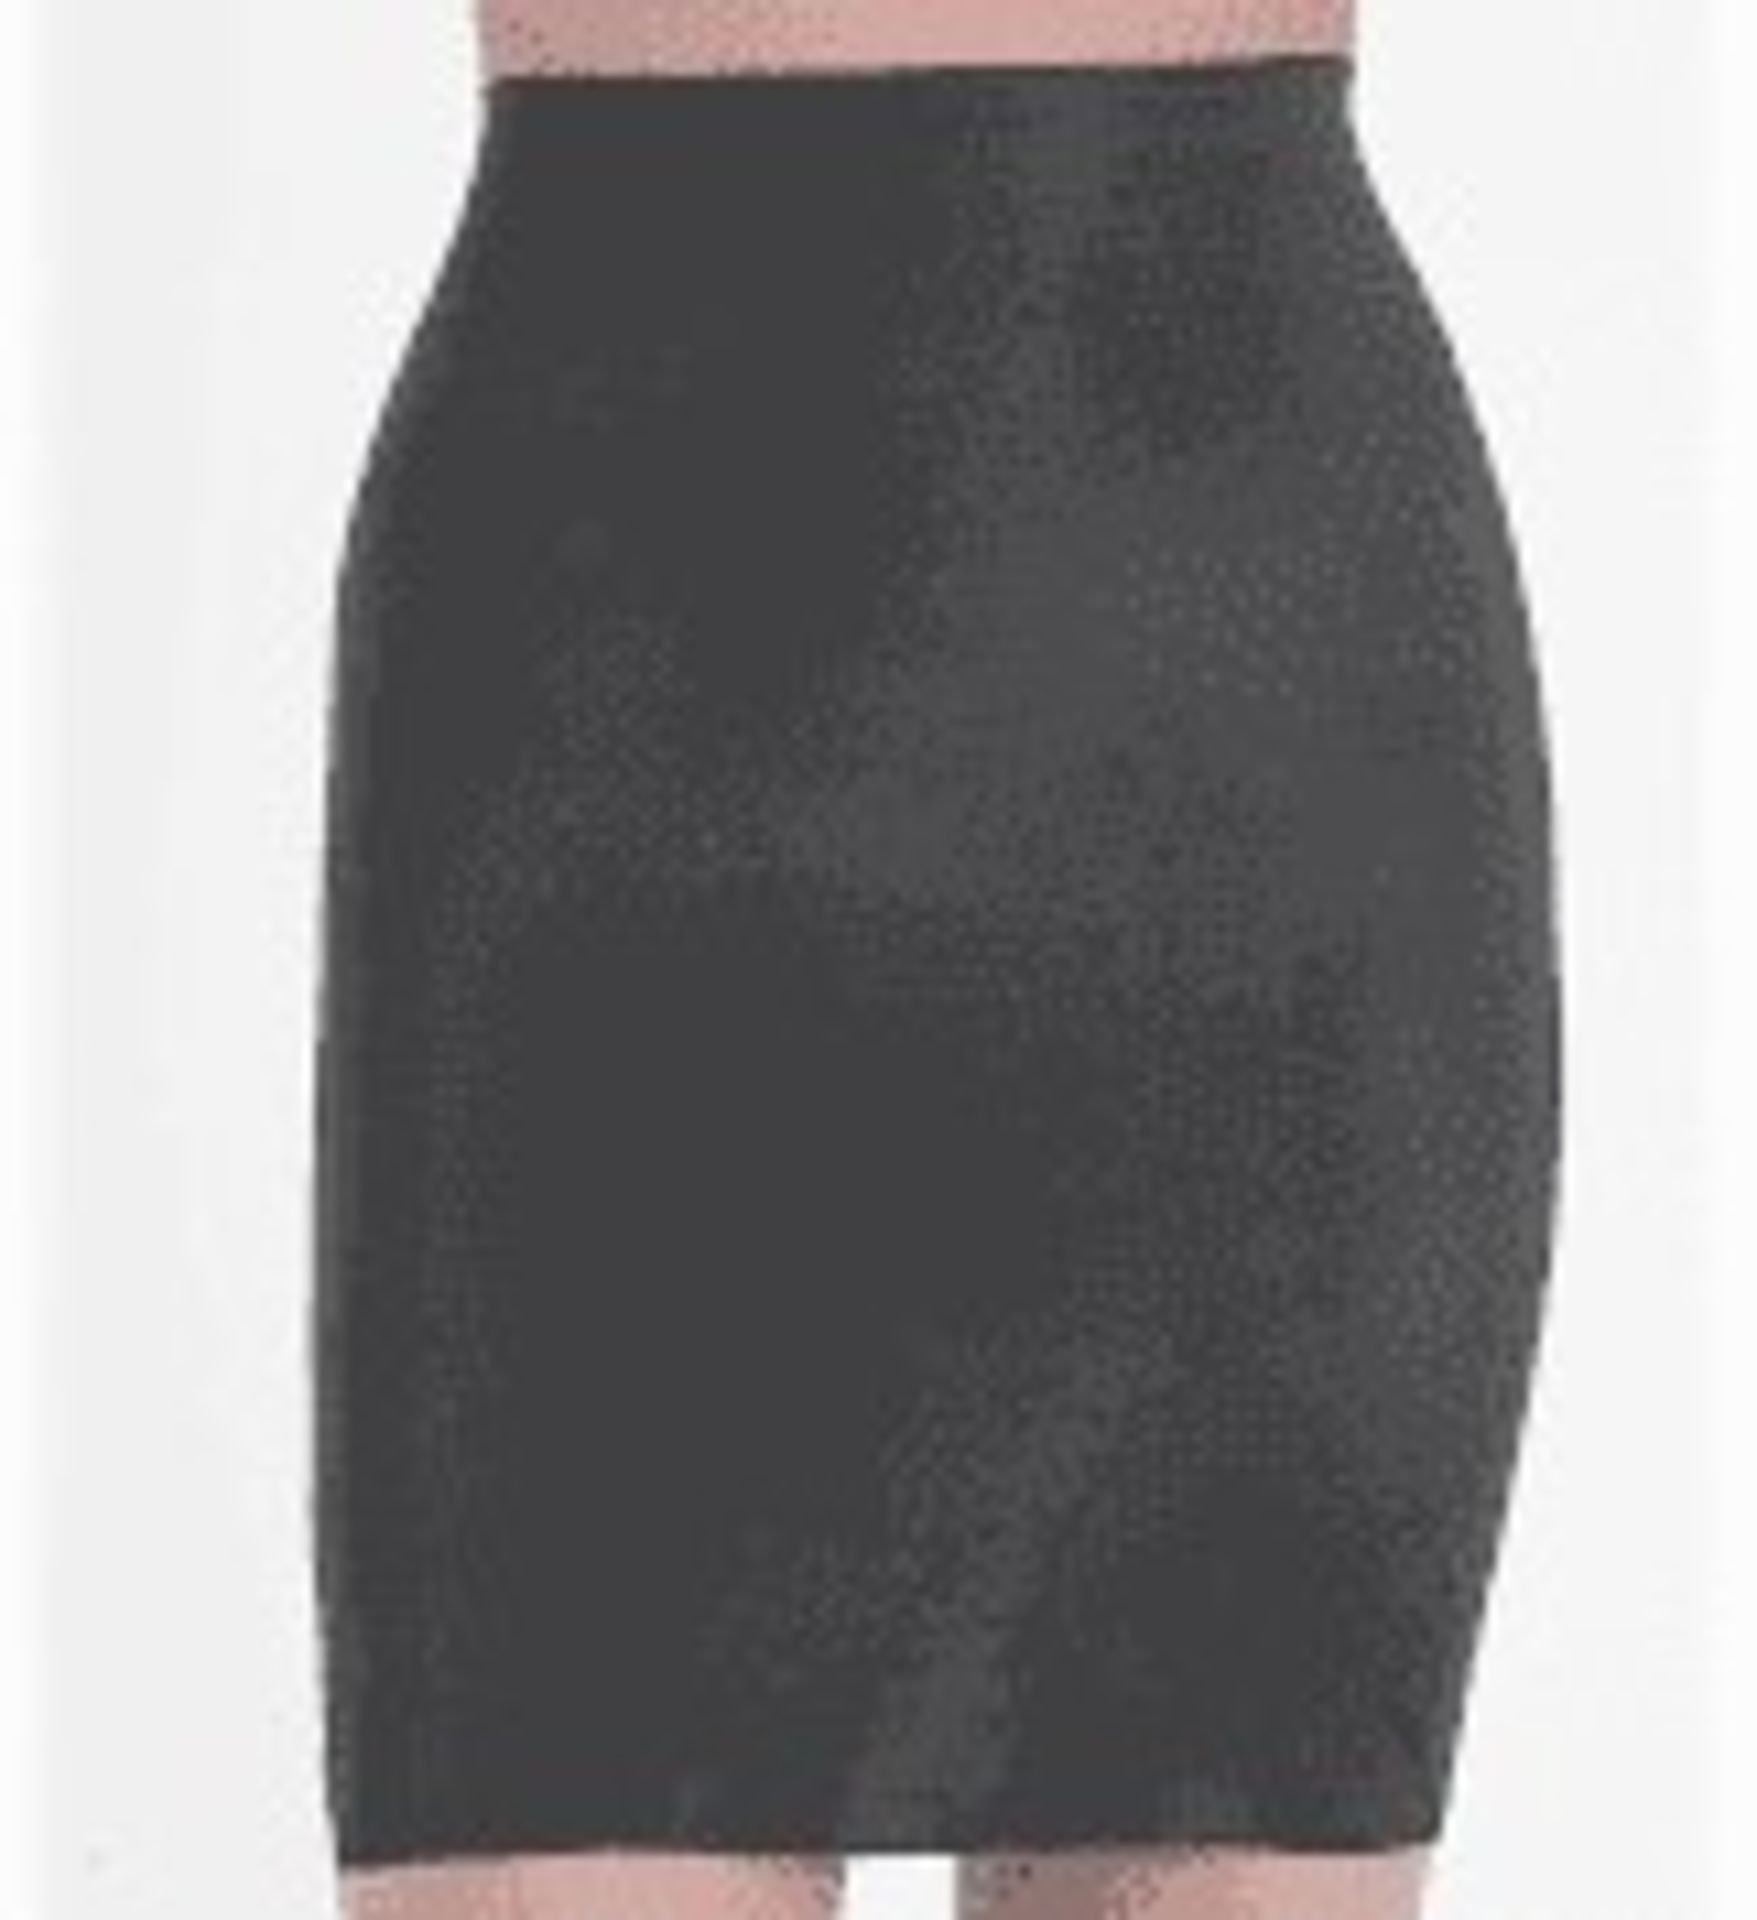 1 LOT TO CONTAIN 5 SPANX SKIRTS IN BOLD BLACK / SIZE 8 / STYLE 1899 / RRP £1144.00 (PUBLIC VIEWING - Image 2 of 2